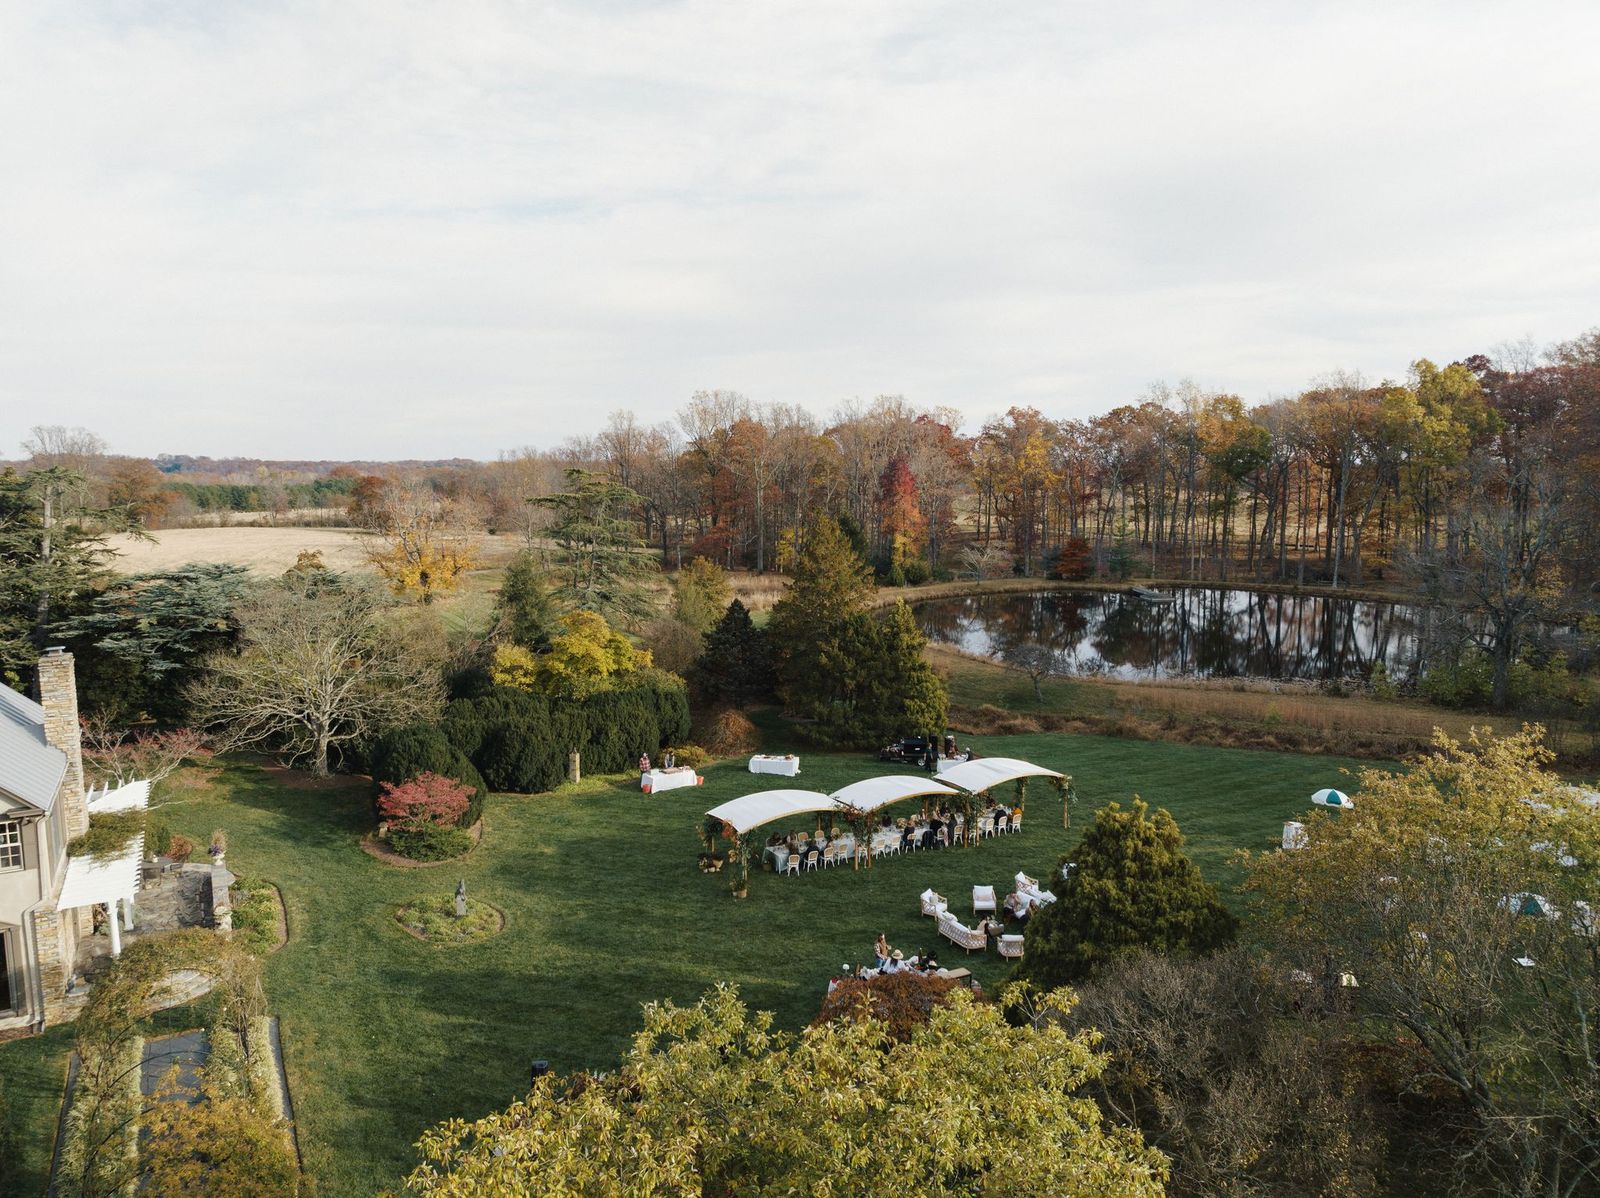 An aerial shot above the estate shows a tent set up for events in a garden